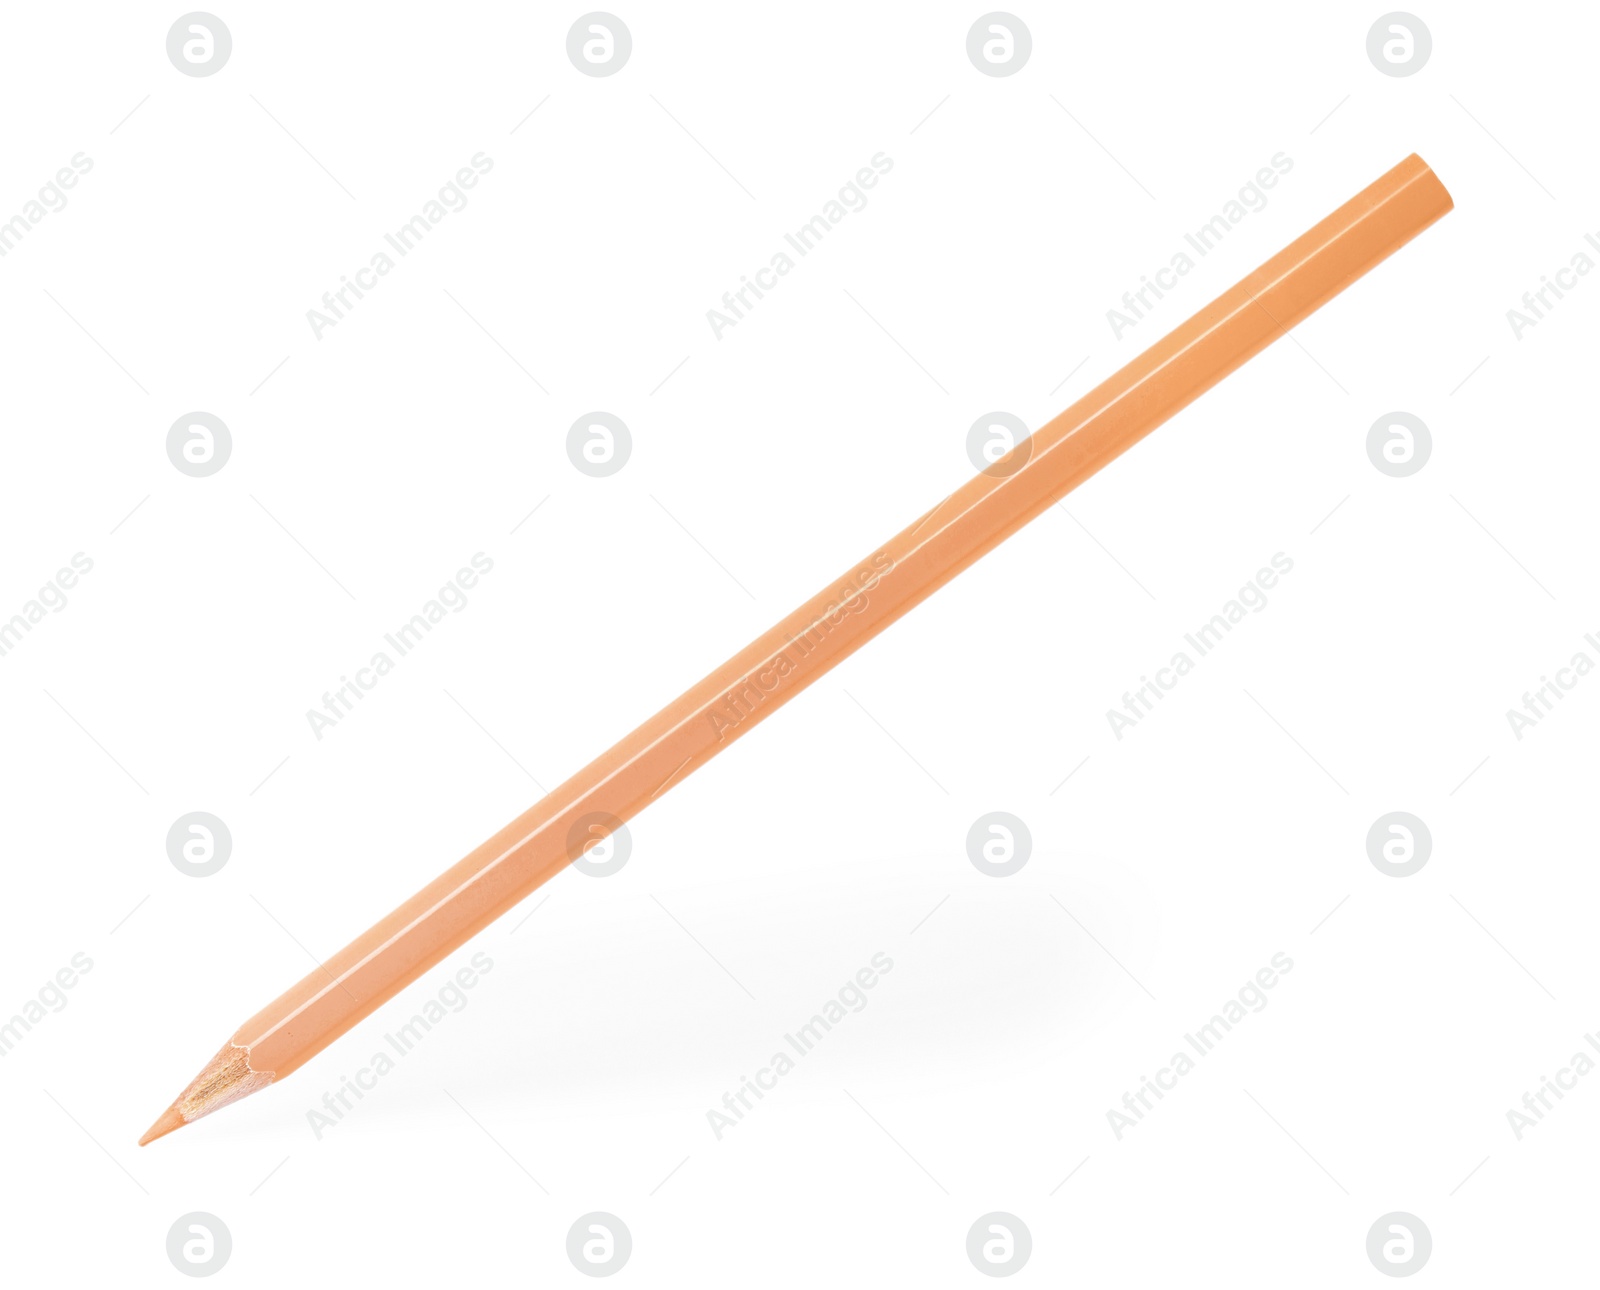 Photo of Apricot wooden pencil on white background. School stationery